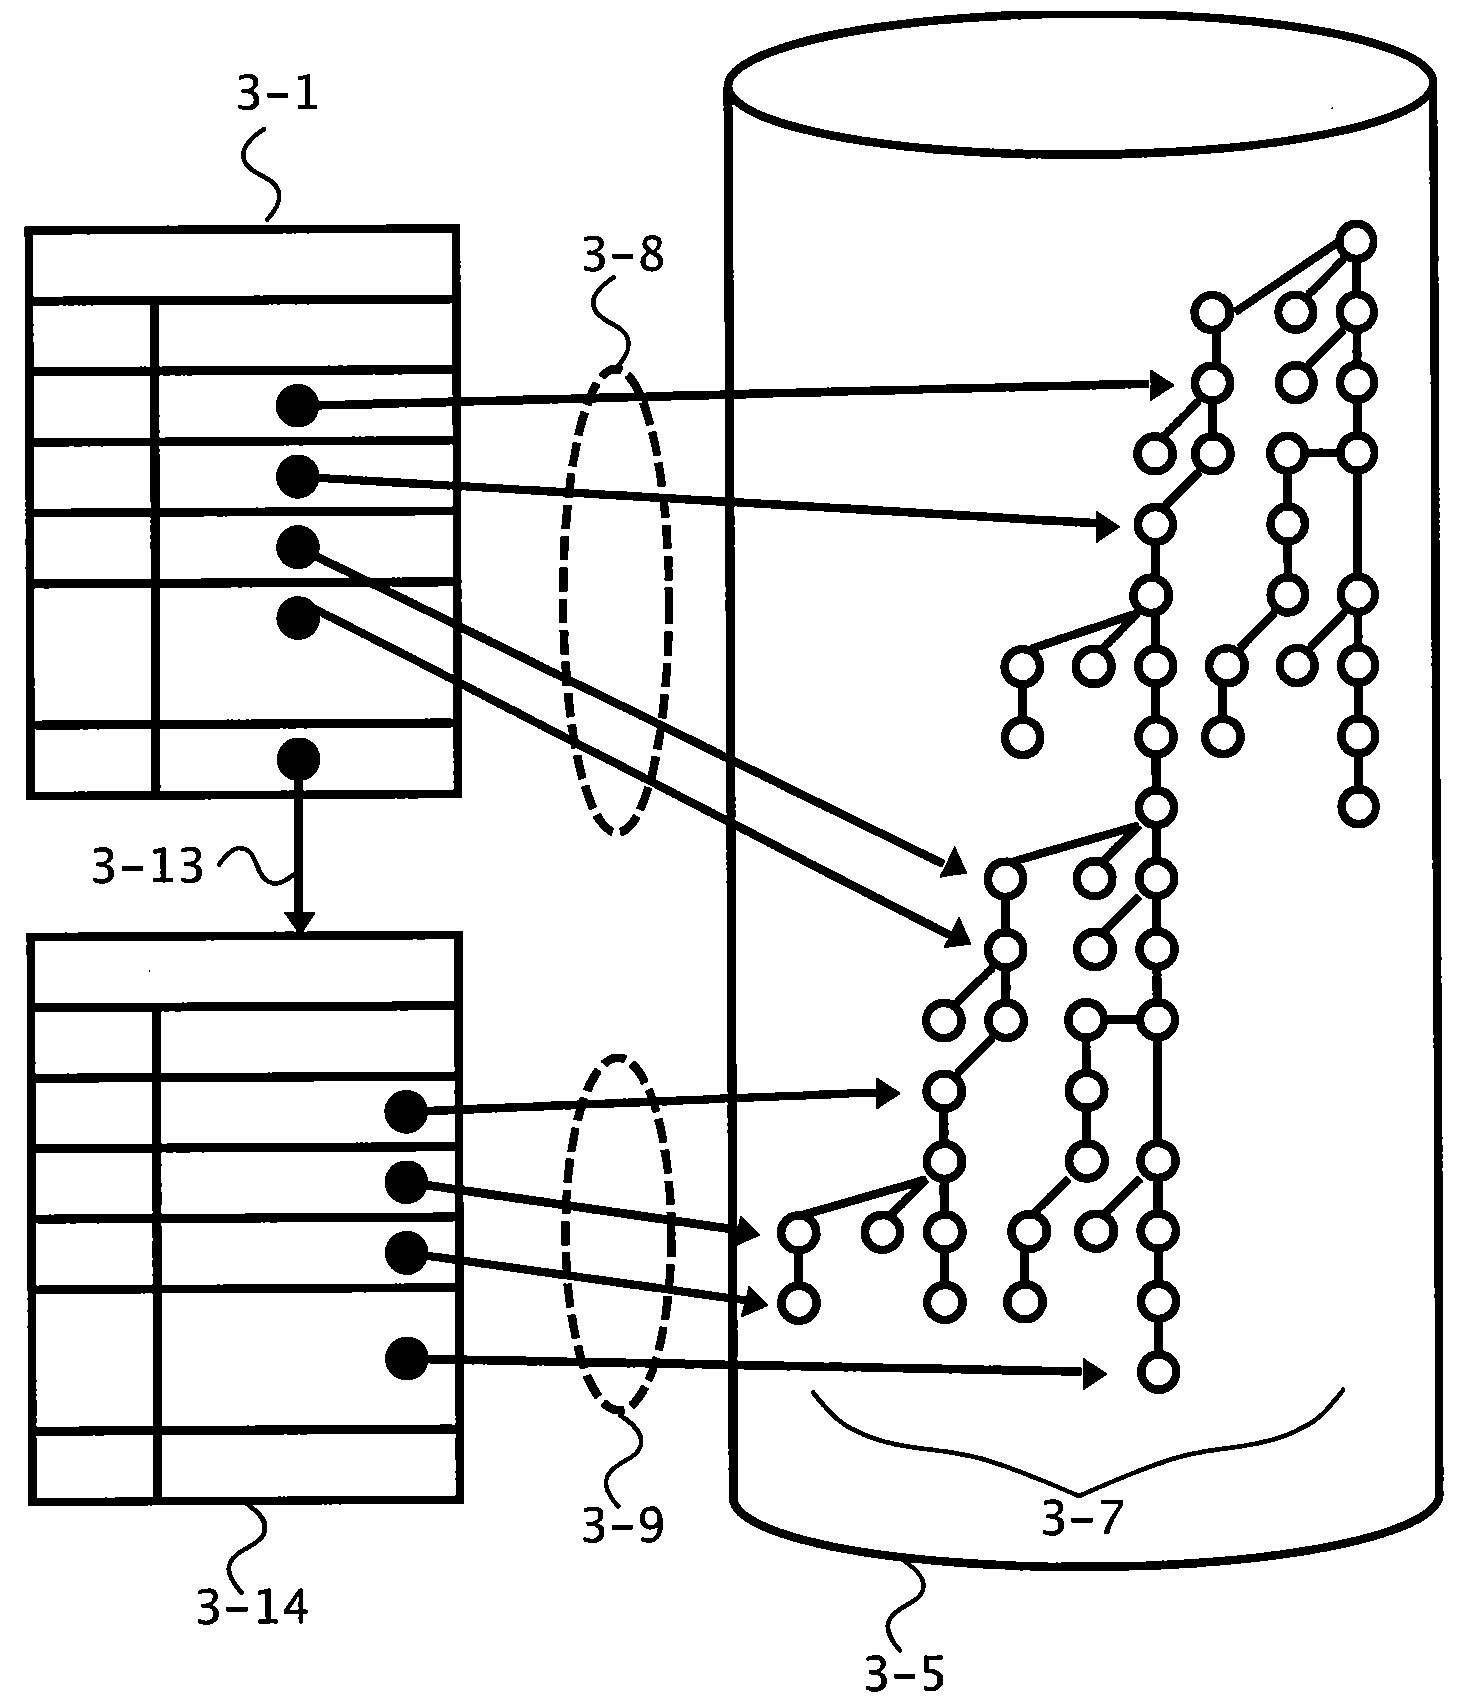 Methods and systems for creating a semantic object